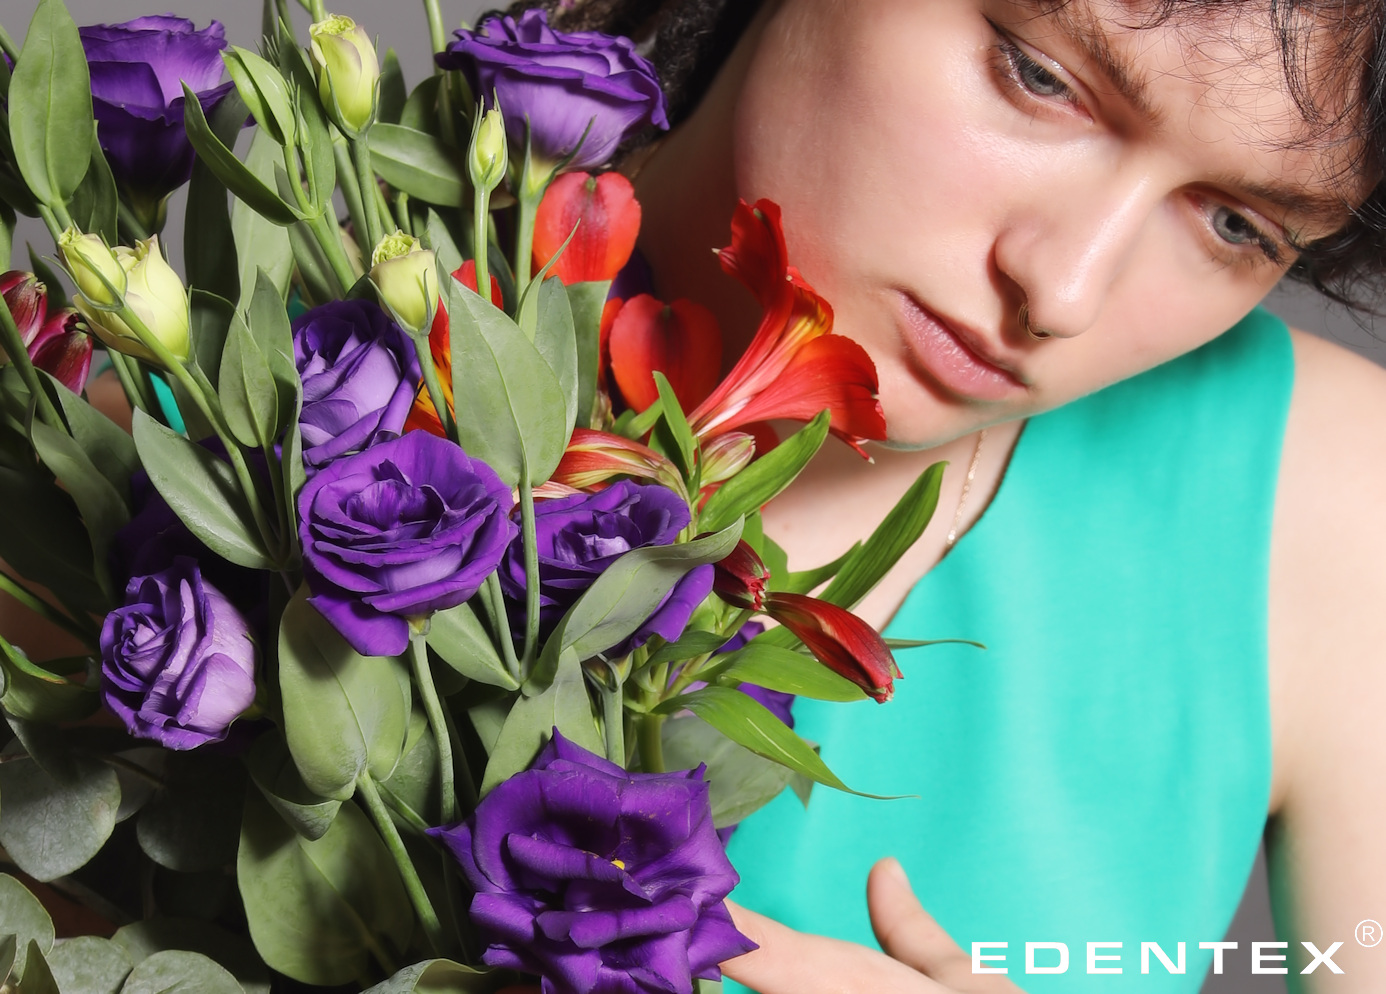 With passion, care and patience, for 25 years now, EDENTEX® is doing his best to create excellent fabrics to make sure that the consumer’s satisfaction always comes first